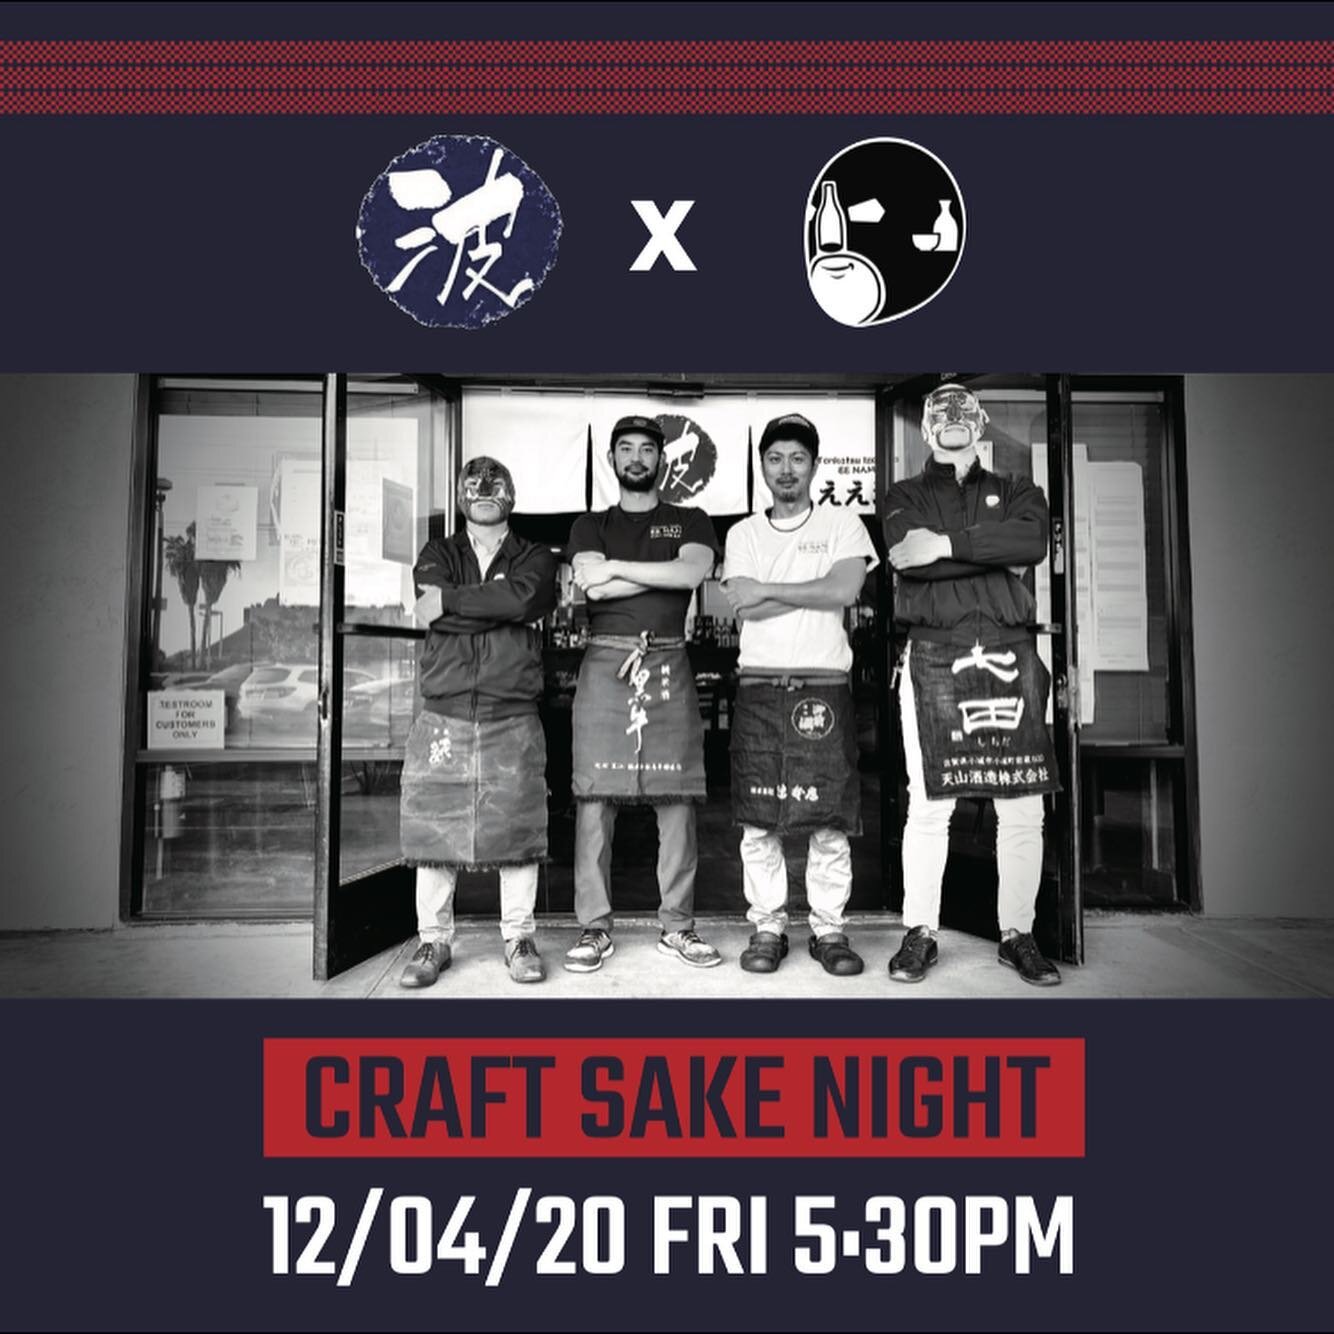 12/4 (Fri) Craft sake night!🍶

We are having multiple craft sake selections from local Japanese breweries!
There will be sake specialists to lead you to find the sake you&rsquo;d like.
They will also teach you how to drink, how it&rsquo;s made, and 